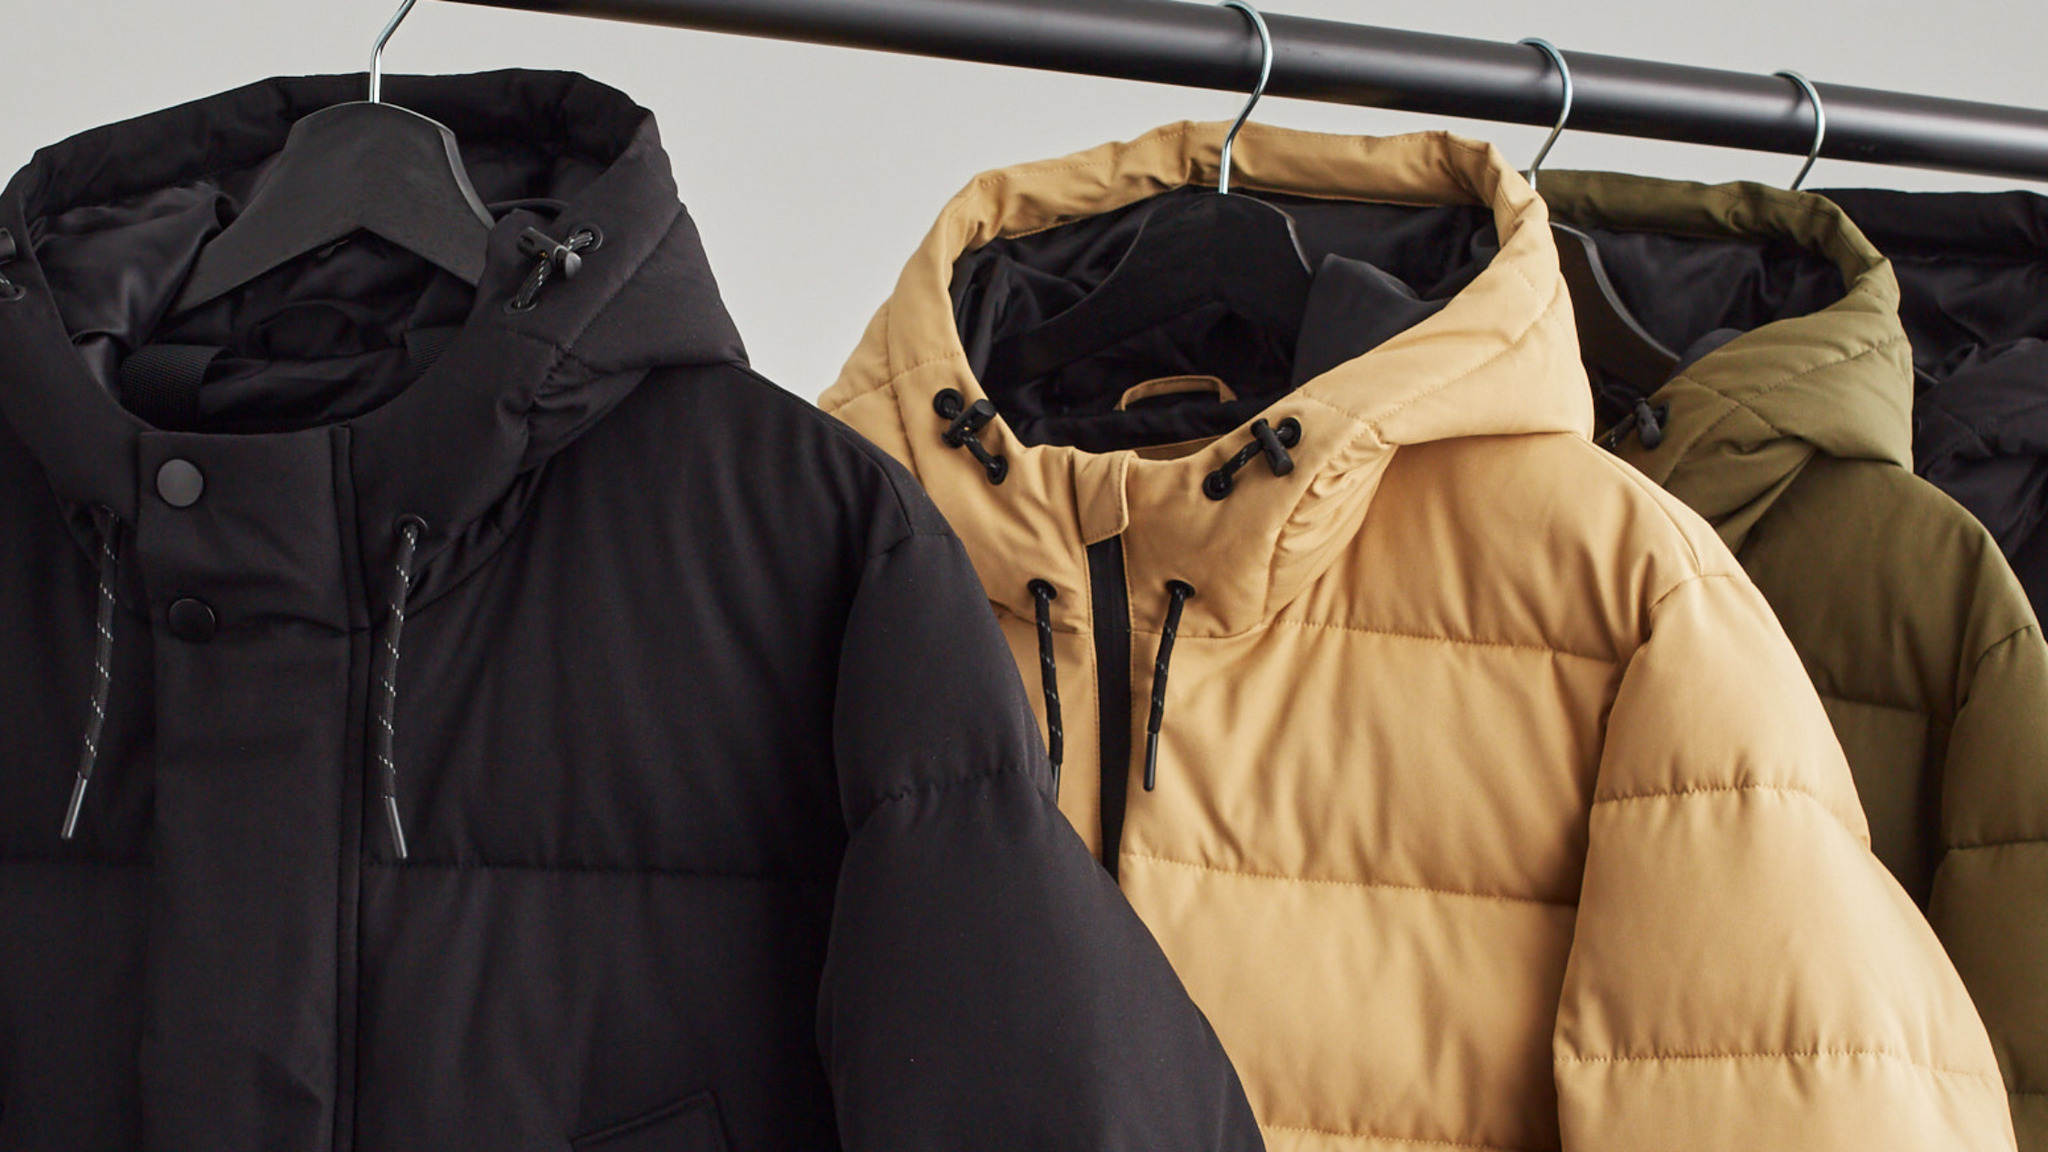 What Winter Jackets Are in Style?